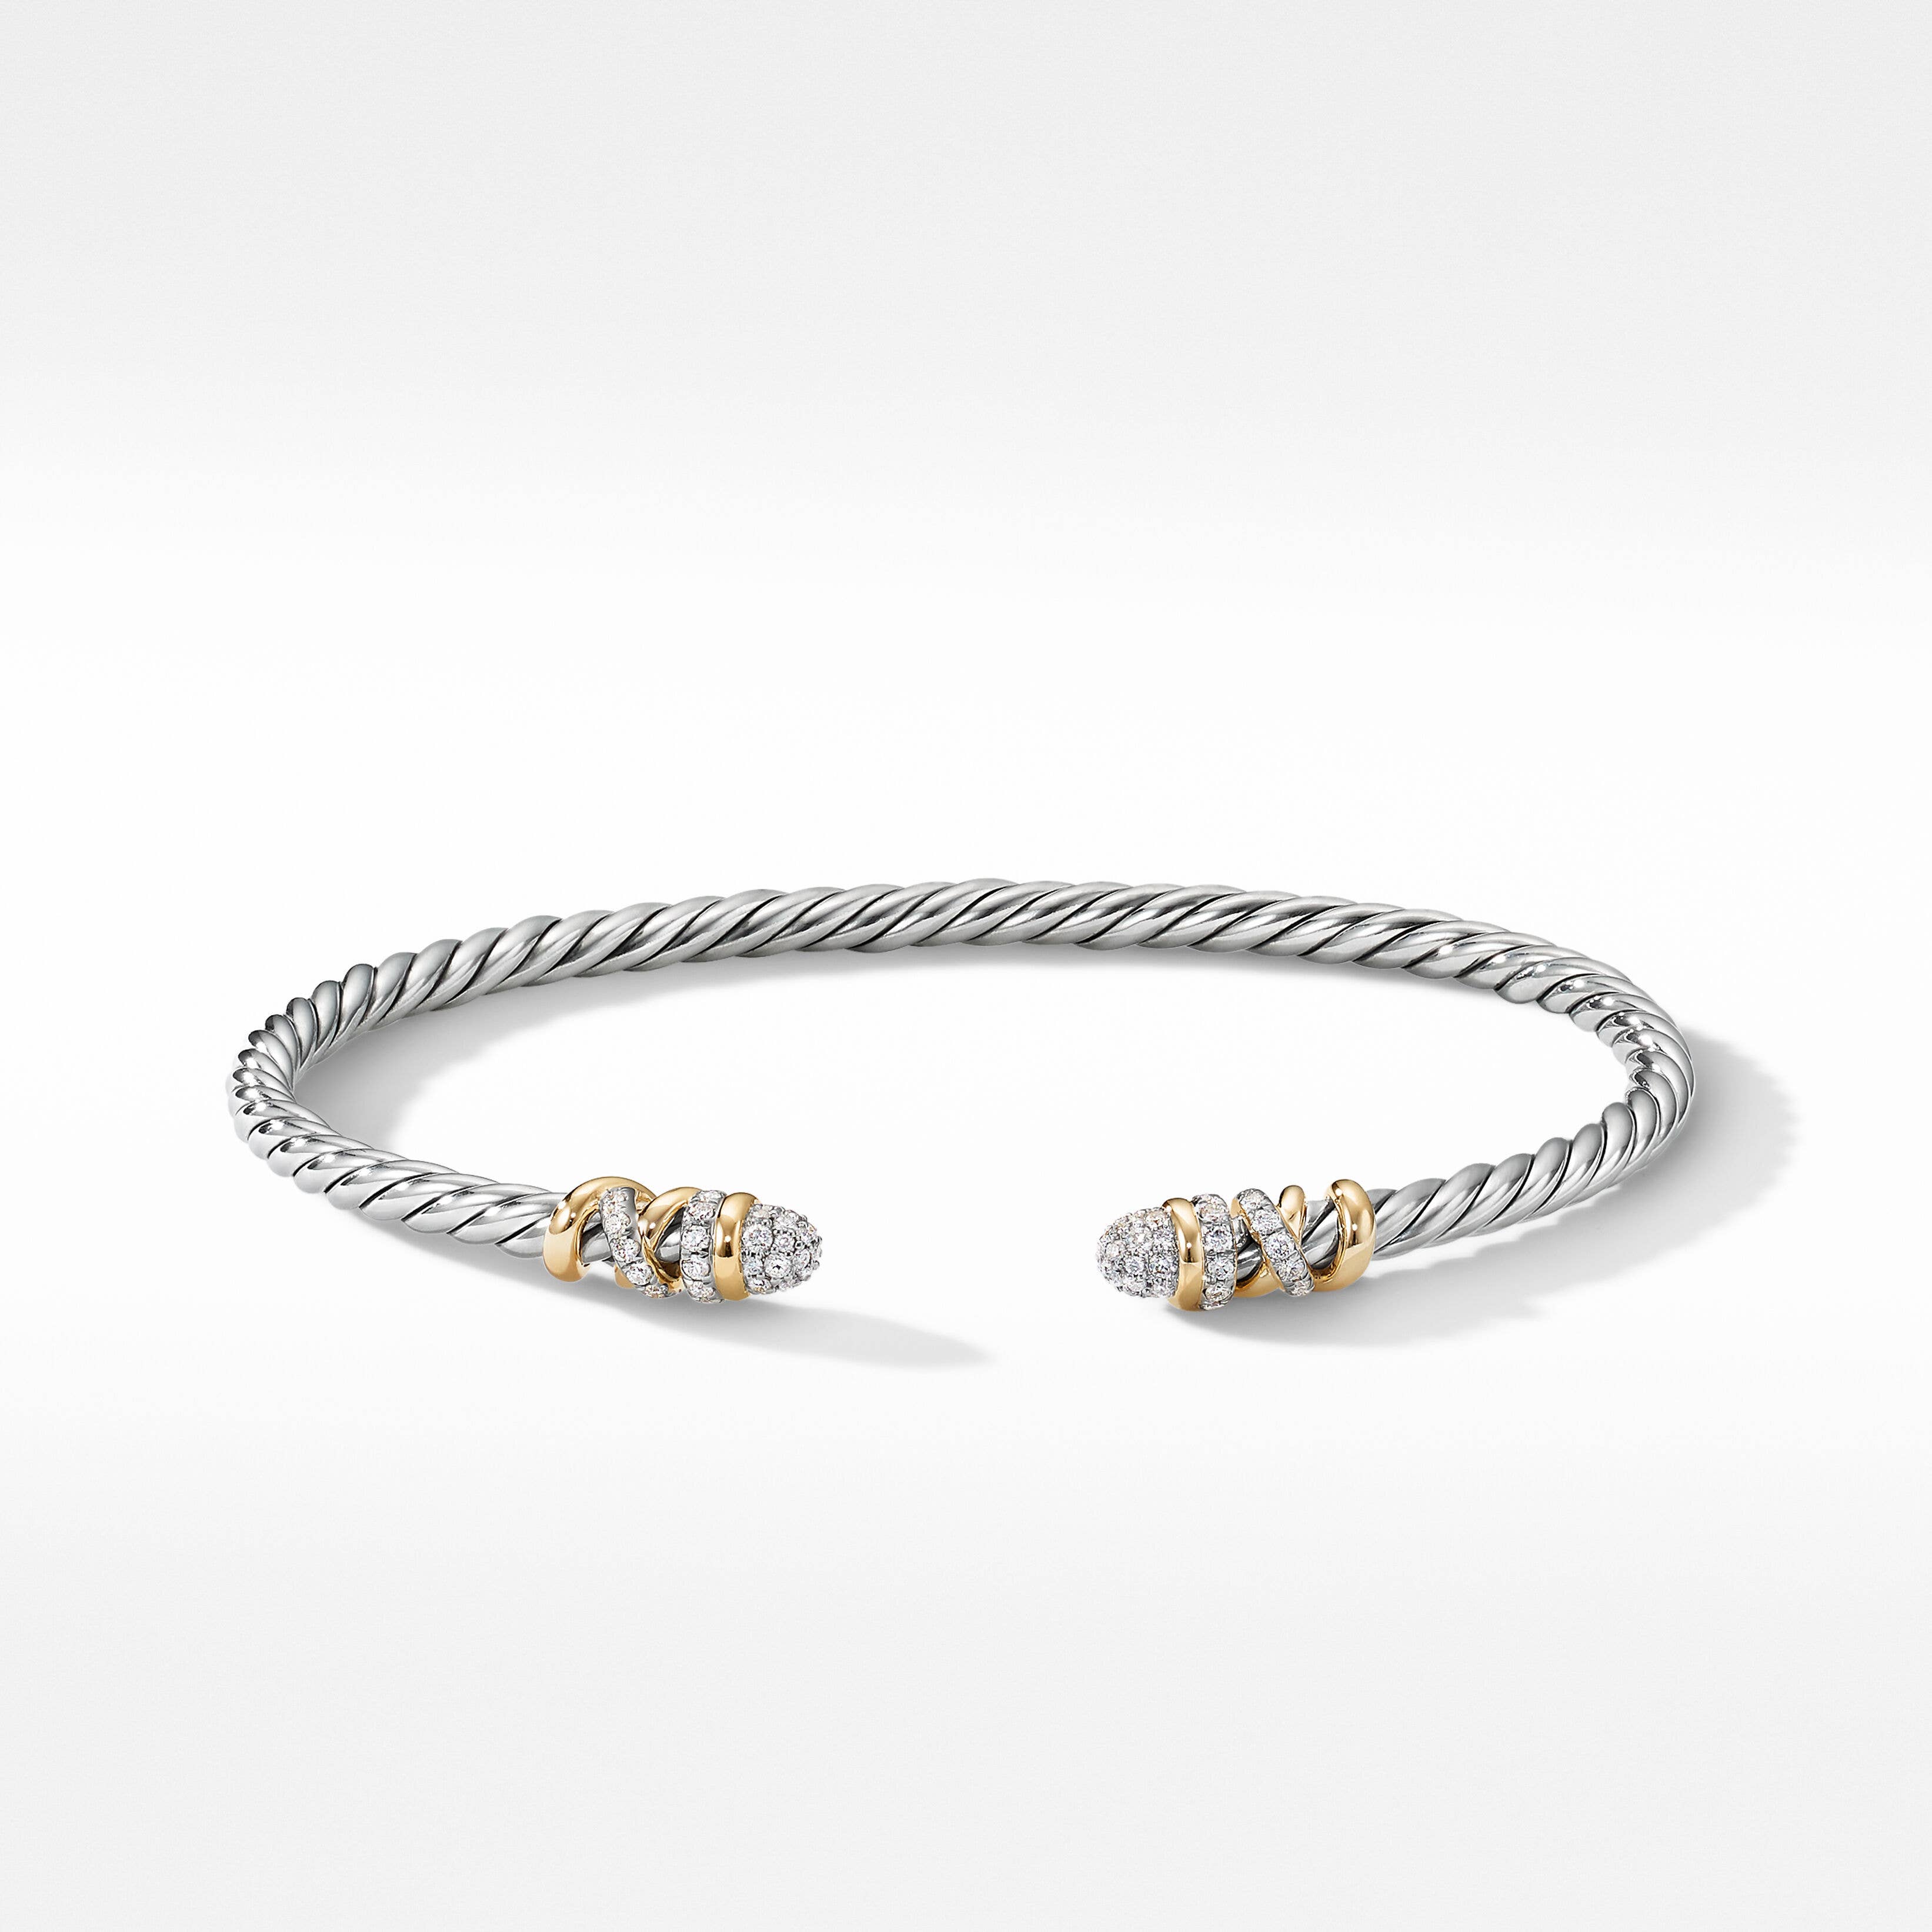 Petite Helena Bracelet in Sterling Silver with 18K Yellow Gold and Pavé Diamonds